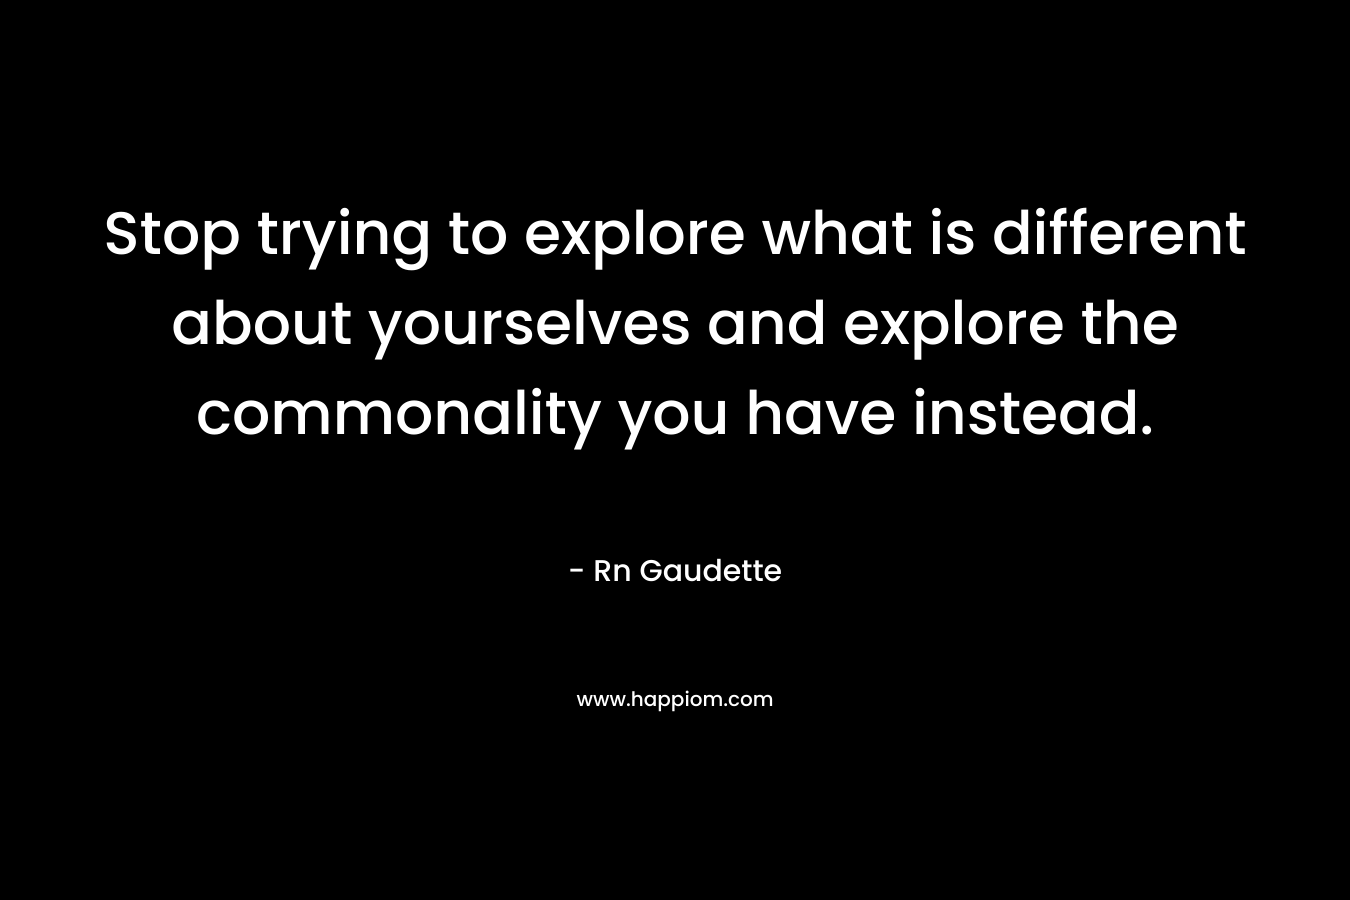 Stop trying to explore what is different about yourselves and explore the commonality you have instead. – Rn Gaudette